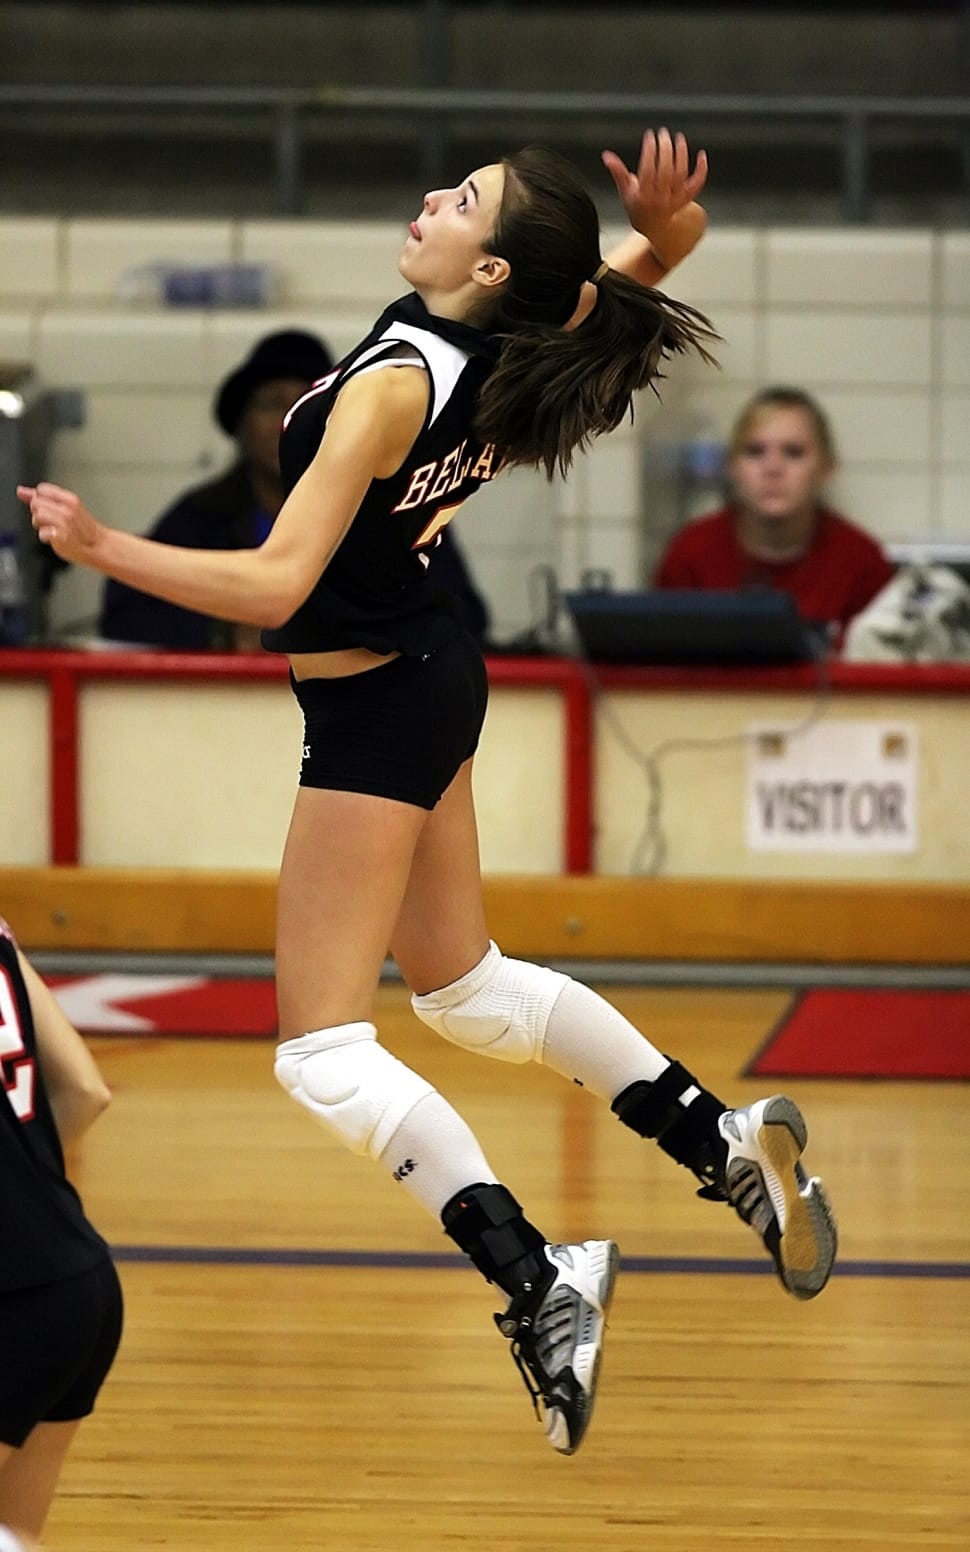 Volleyball, Athlete, Player, Spike, sport, motion preview